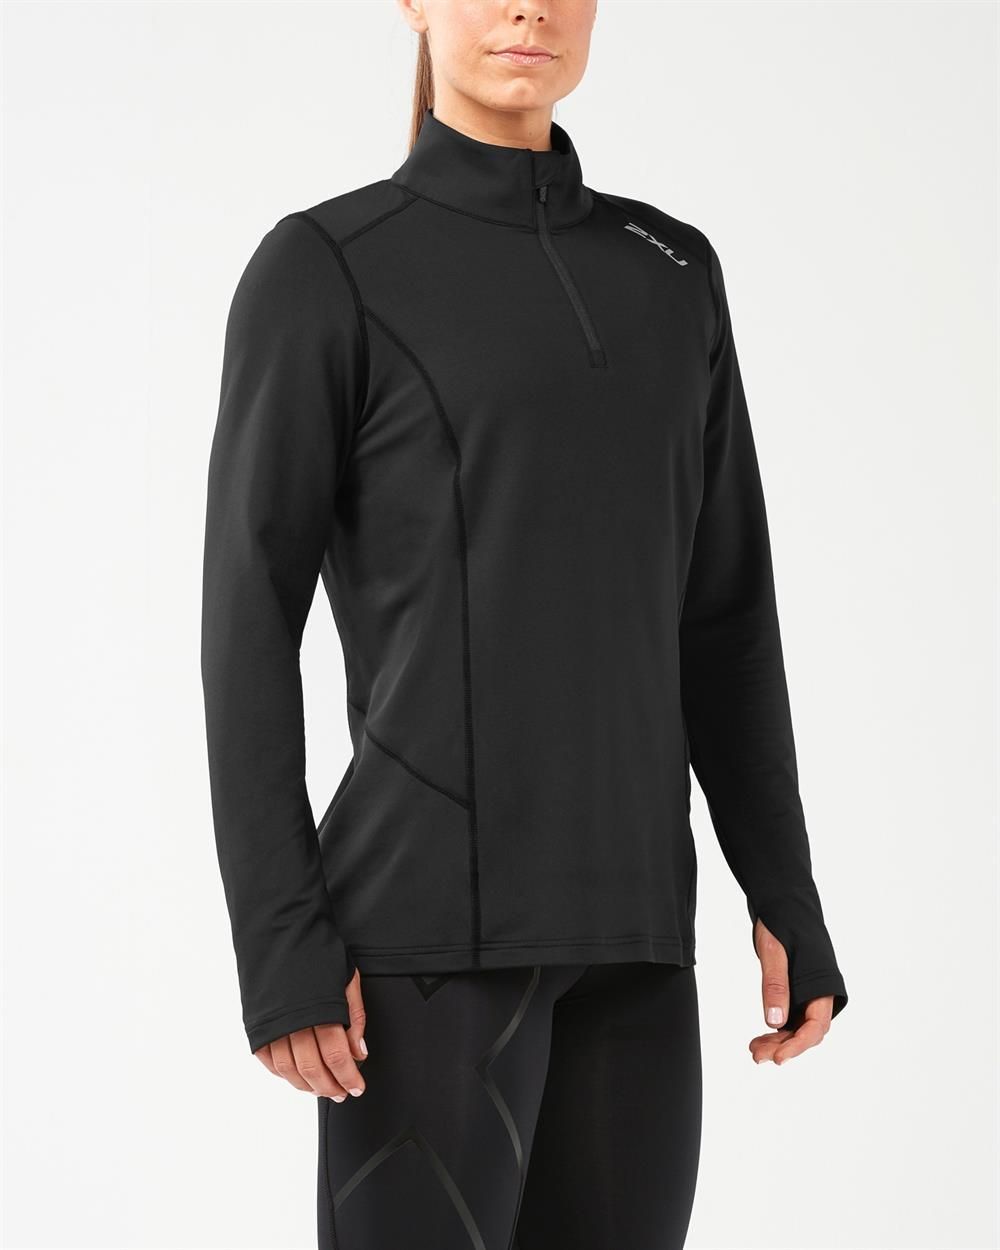 Xvent 1/4 Zip Long Sleeve Top Black, Jersey Shell, 100% Polyester, Mesh Vapor Stretch, 88% Polyester / 12% Spandex 120gsm, Designed For Our Core Run Consumer, The Xvent 1/4 Zip Top Offers, Excellent Breathability And Moisture Control, Perfect For Race Day, Or Training,